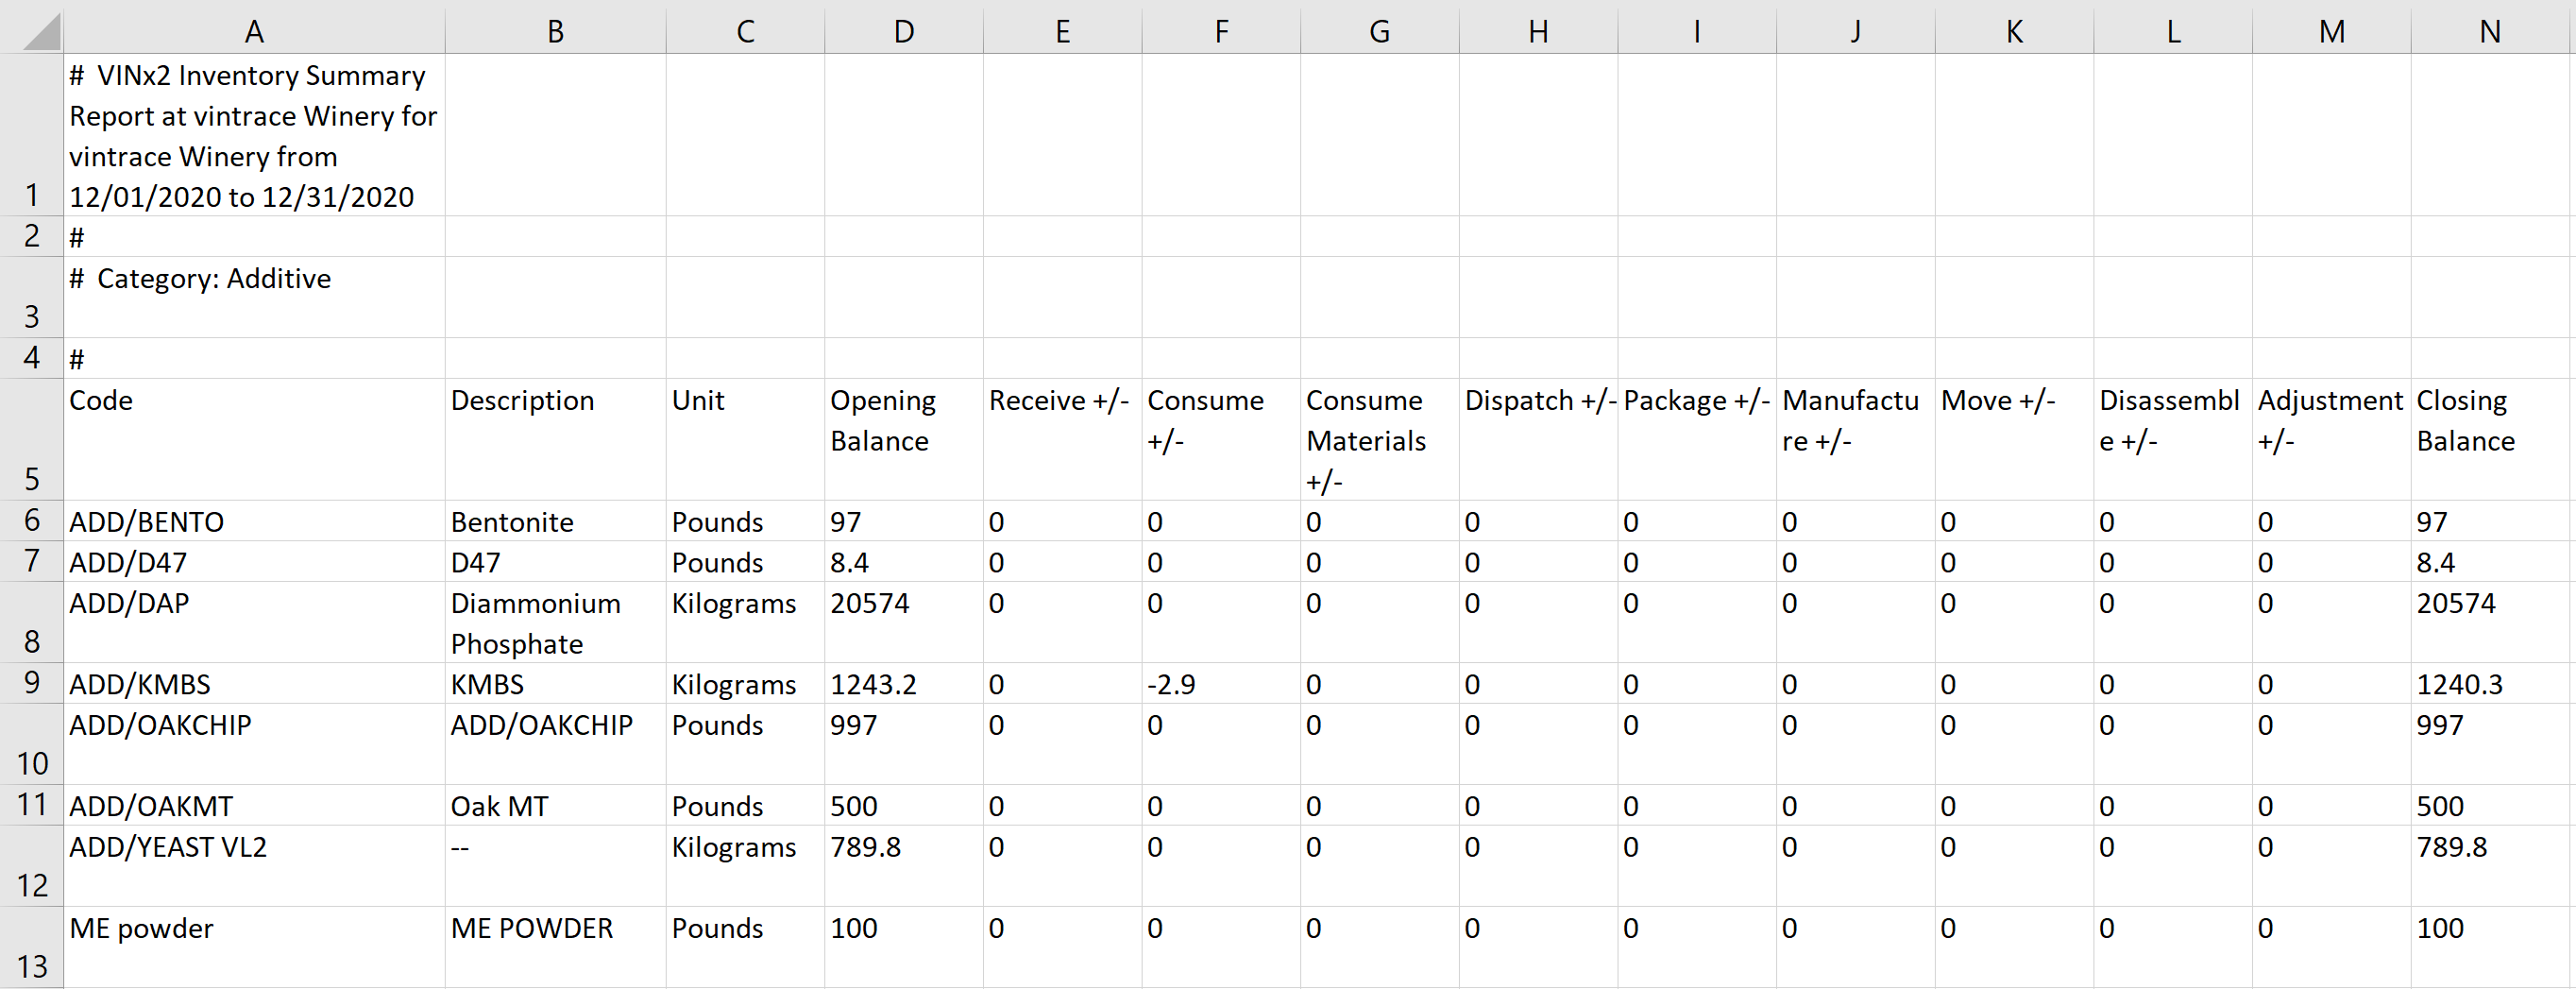 Inventory_Summary_Report_CSV_20201216.png